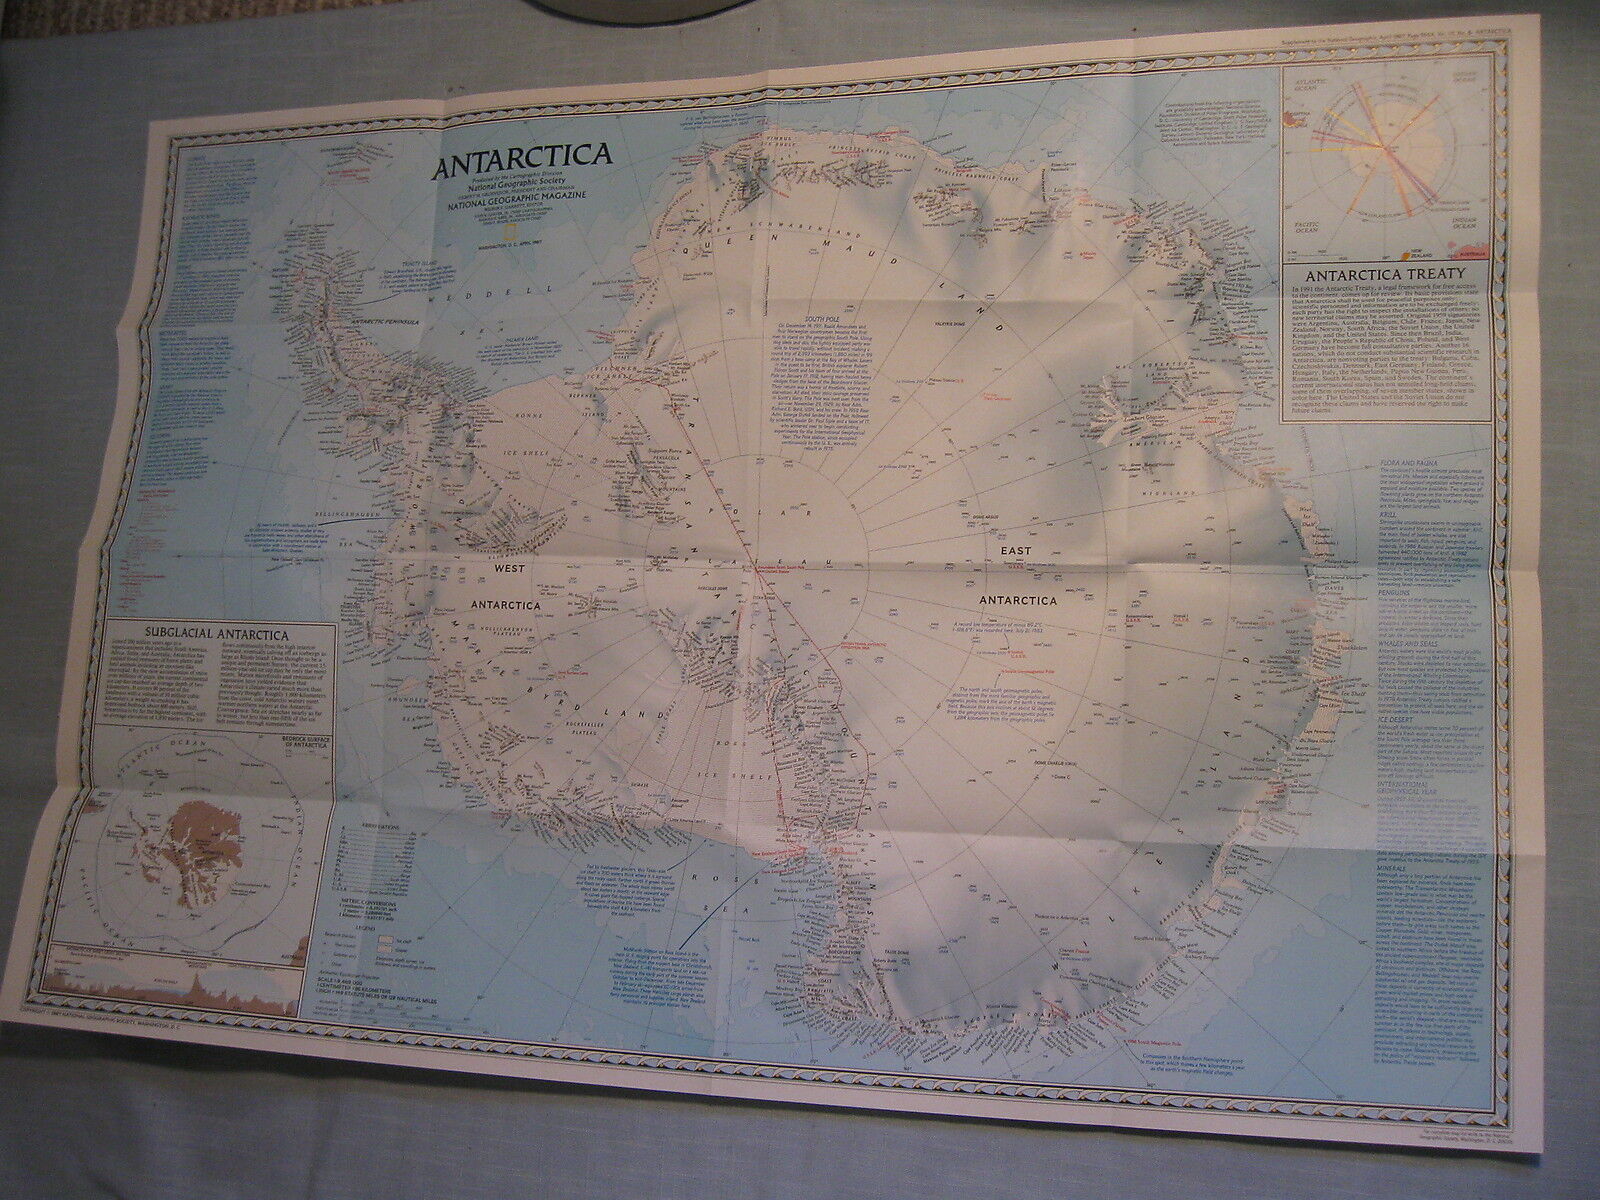 PINNIPEDS + ANTARCTICA SOUTH POLE MAP April 1987 National Geographic